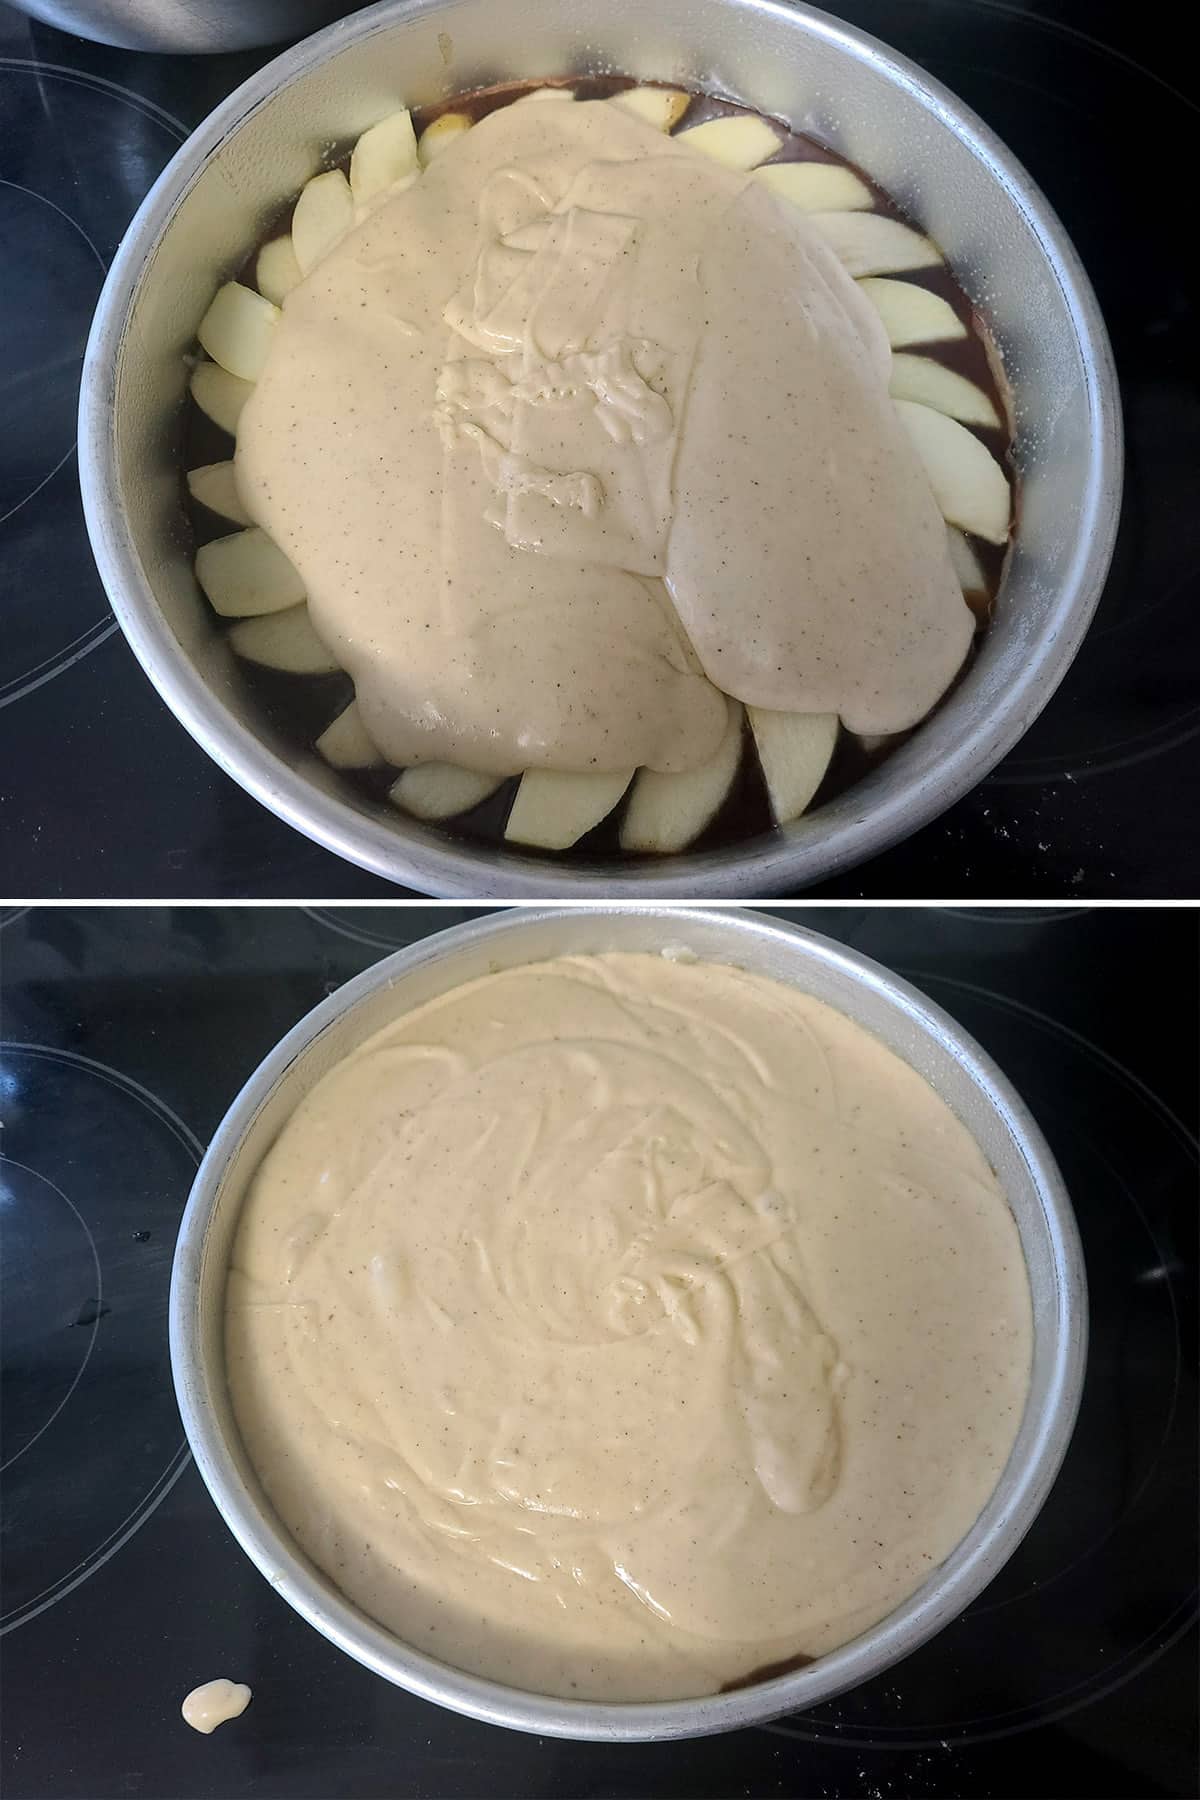 A 2 part image showing the batter being poured over the apple slices.